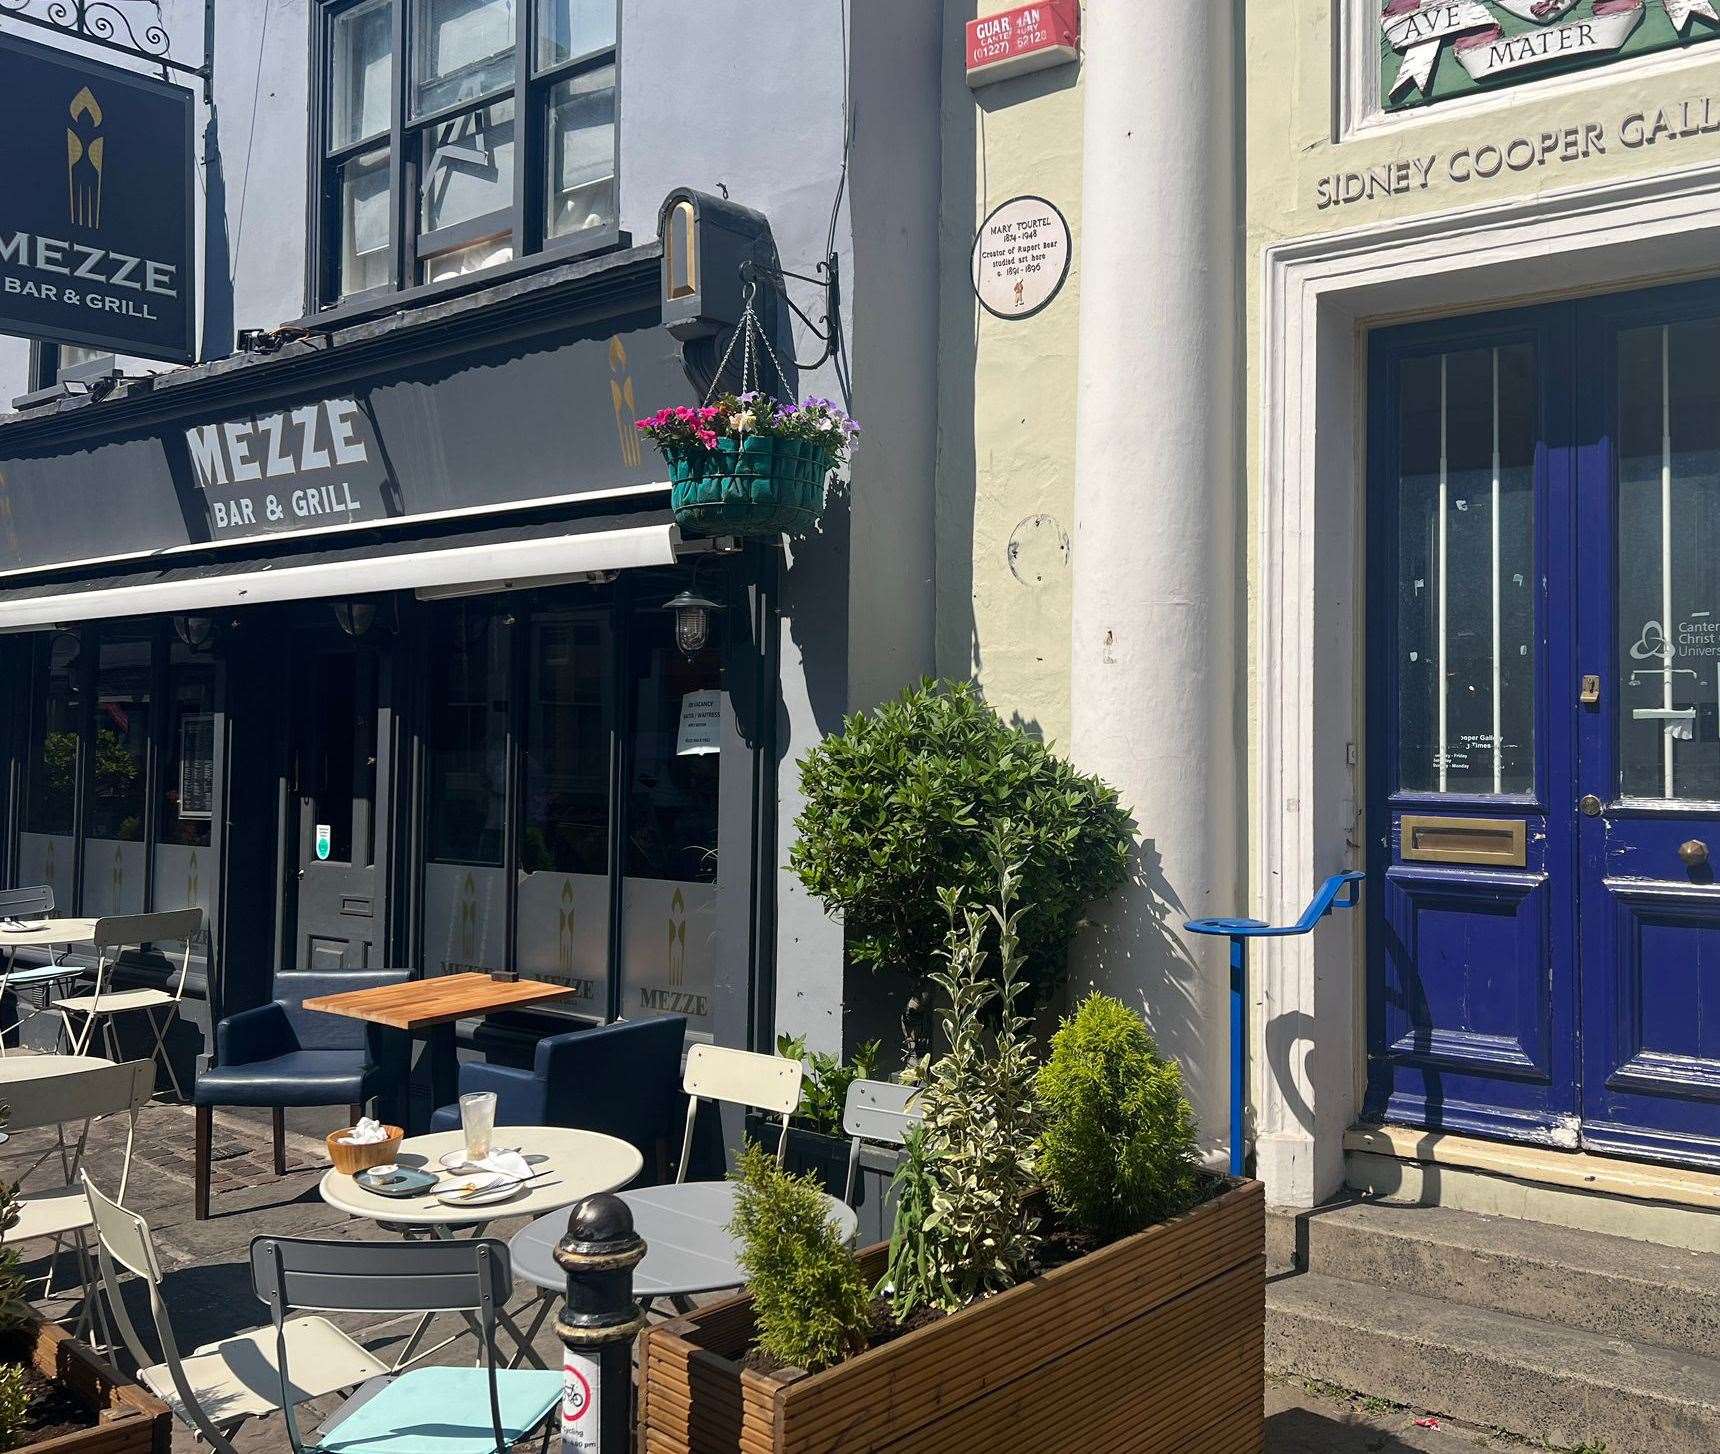 The bees were spotted outside Mezze Bar & Grill in St Peter's Street, Canterbury